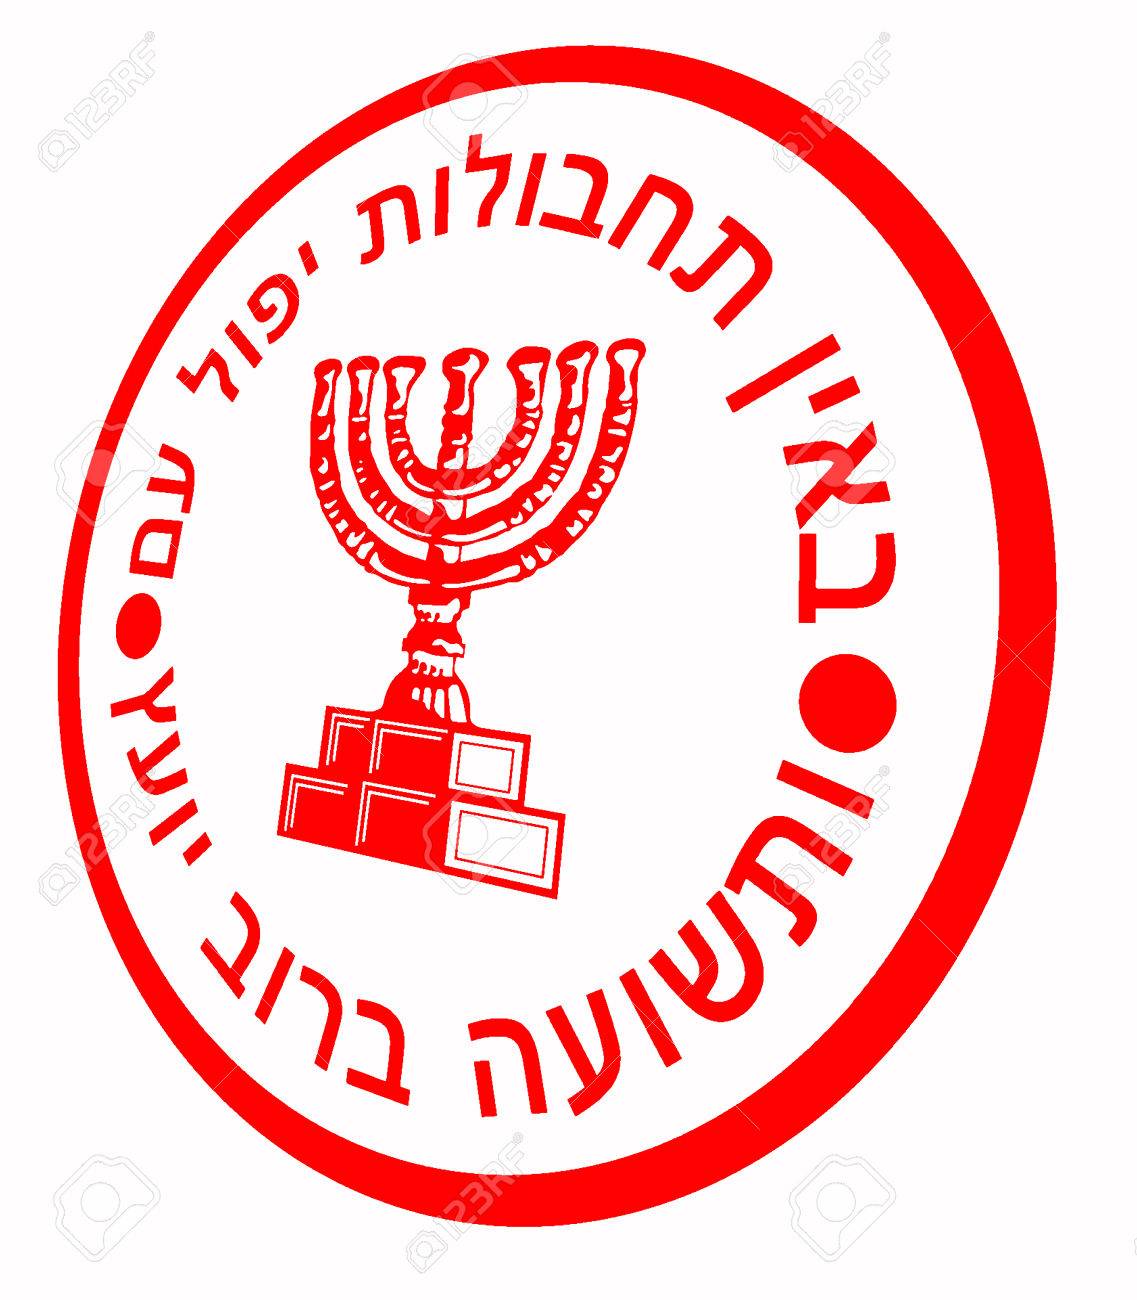 Mossad Badge In Perspective Over A White Background Royalty